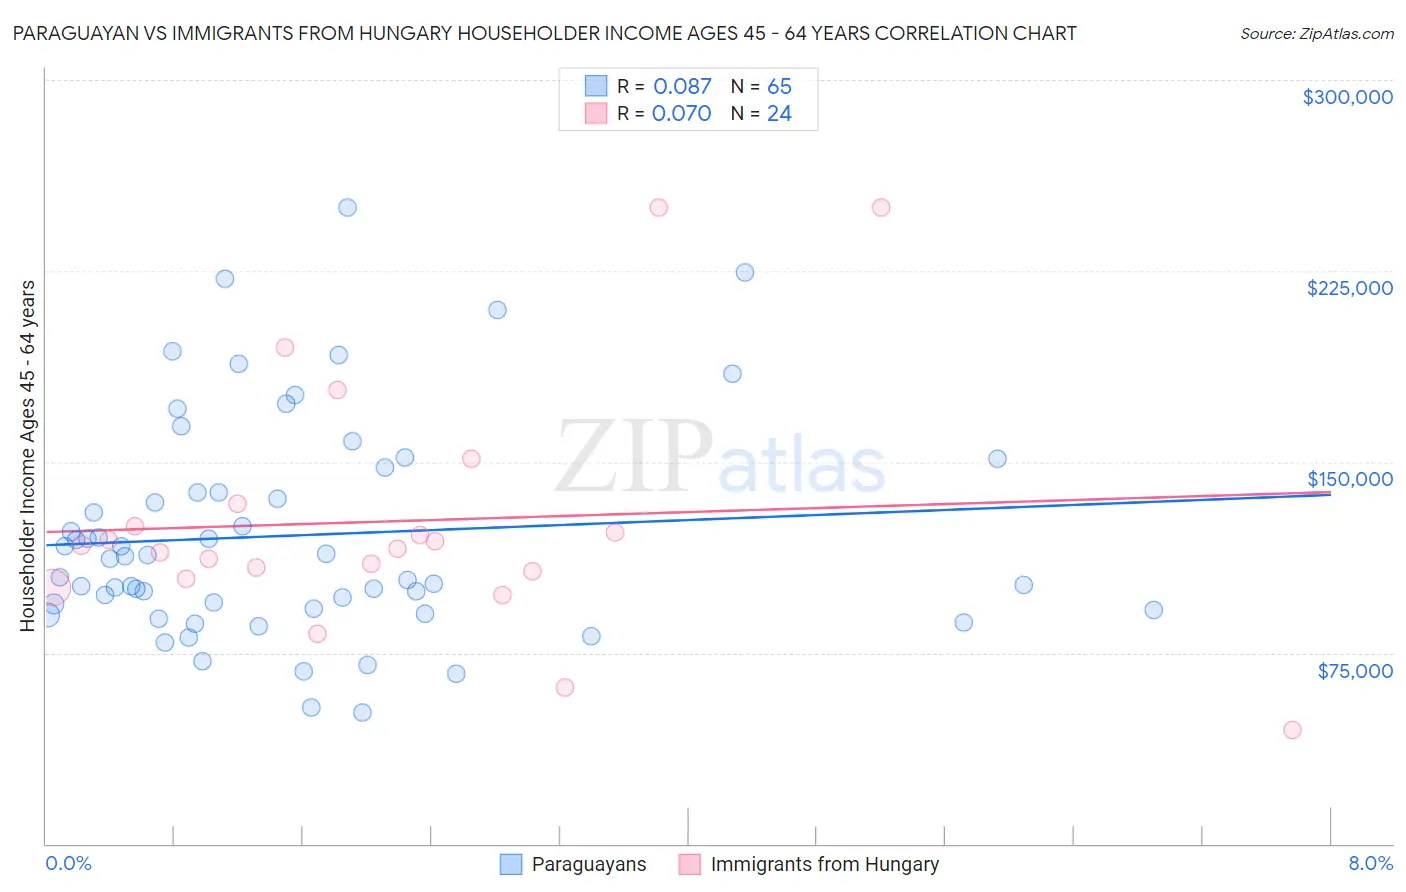 Paraguayan vs Immigrants from Hungary Householder Income Ages 45 - 64 years